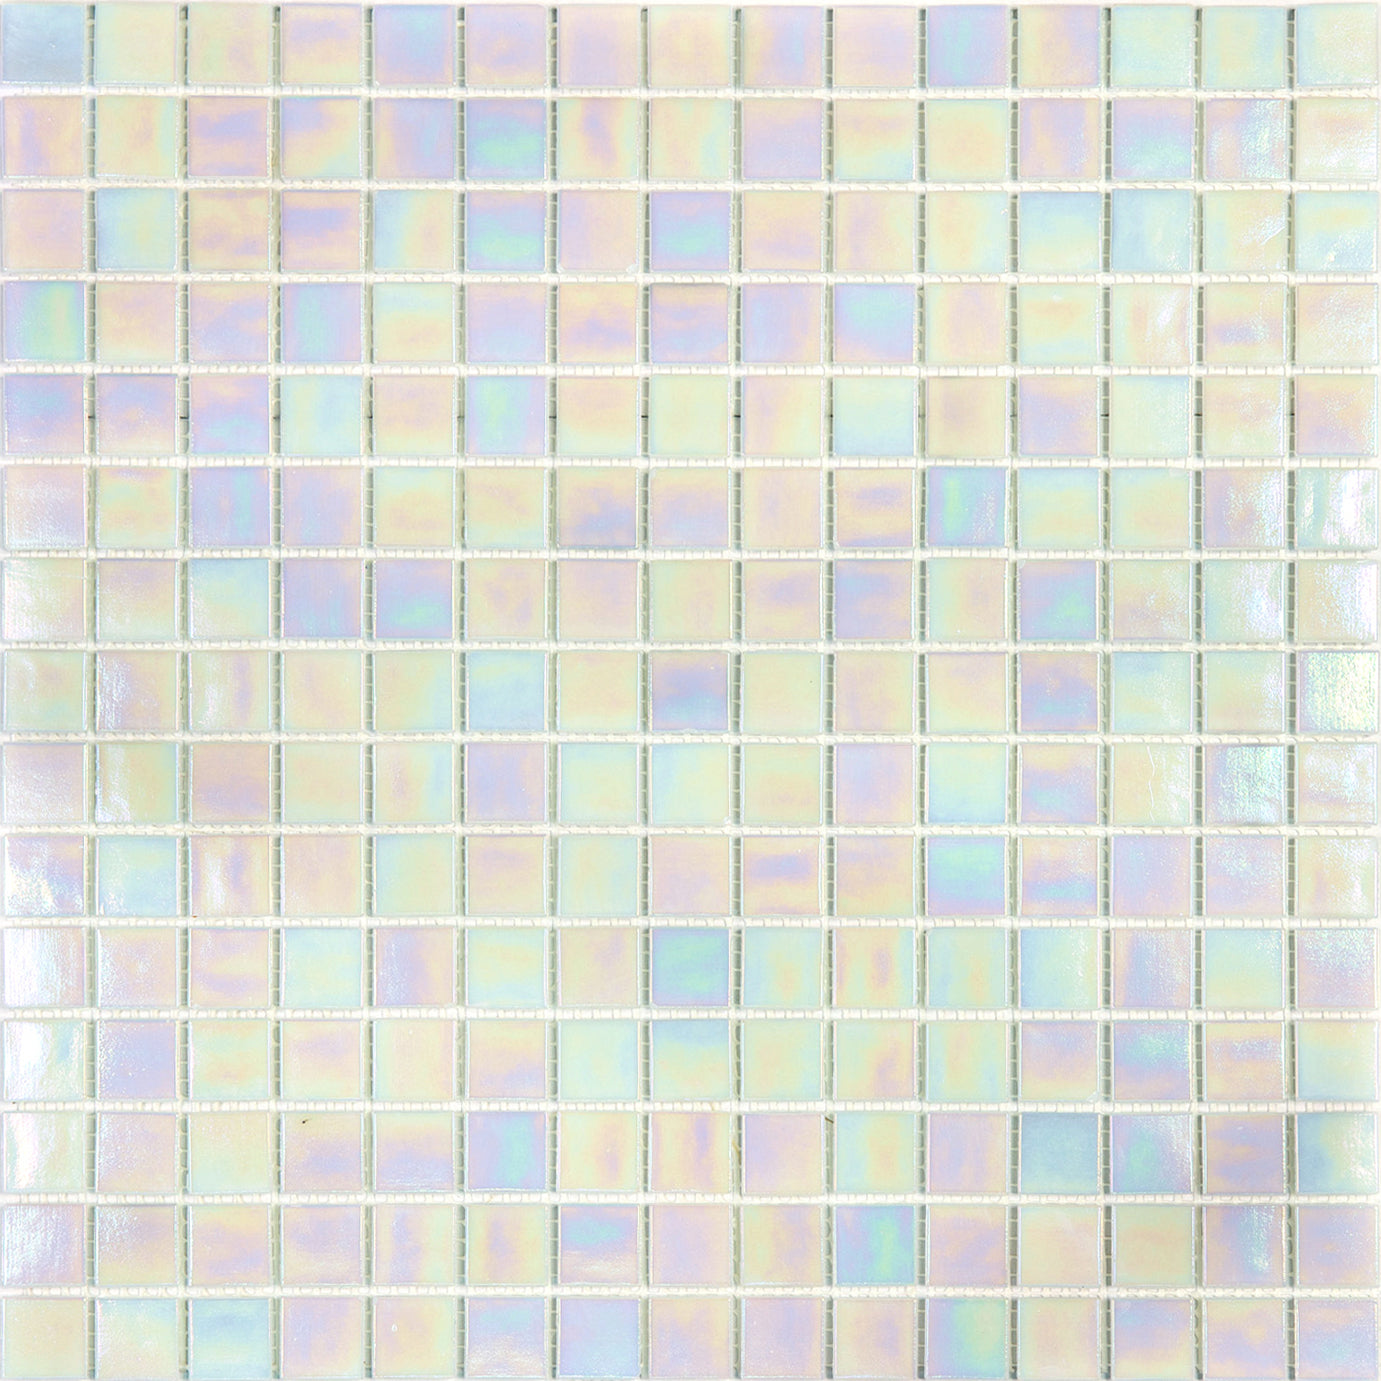 mir alma solid colors 0_8 inch pearly pe09 wall and floor mosaic distributed by surface group natural materials